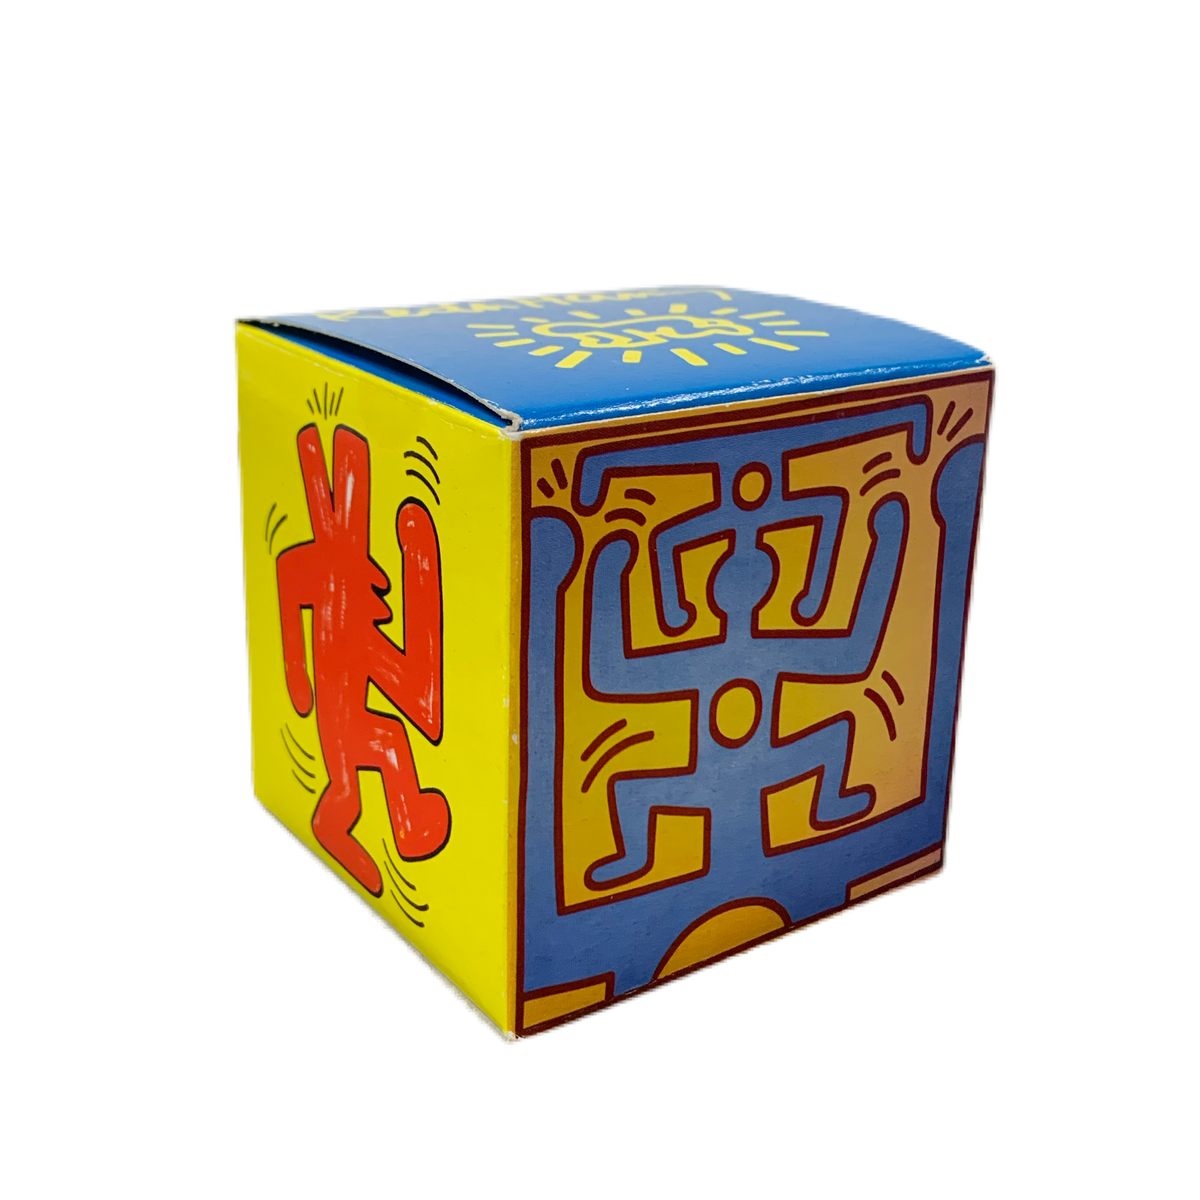 Vintage Keith Haring “Museum Collection” Art Cube